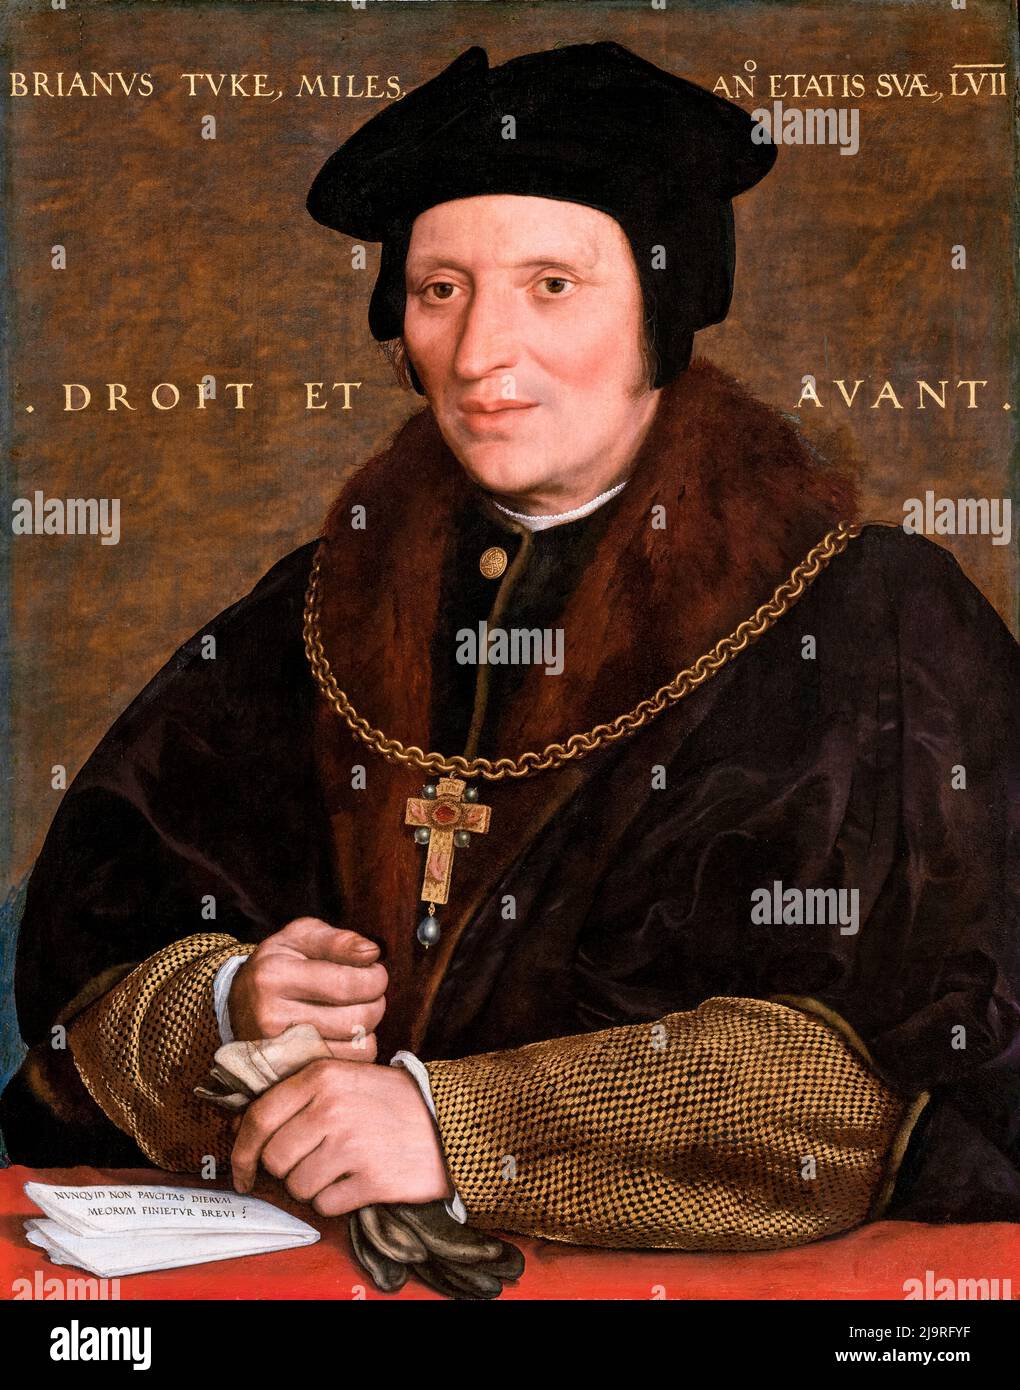 Sir Brian Tuke (-1545), Master of the Posts, established England's first formal Postal network, portrait painting in oil on panel by Hans Holbein the Younger, circa 1527-1528 or 1532-1534 Stock Photo